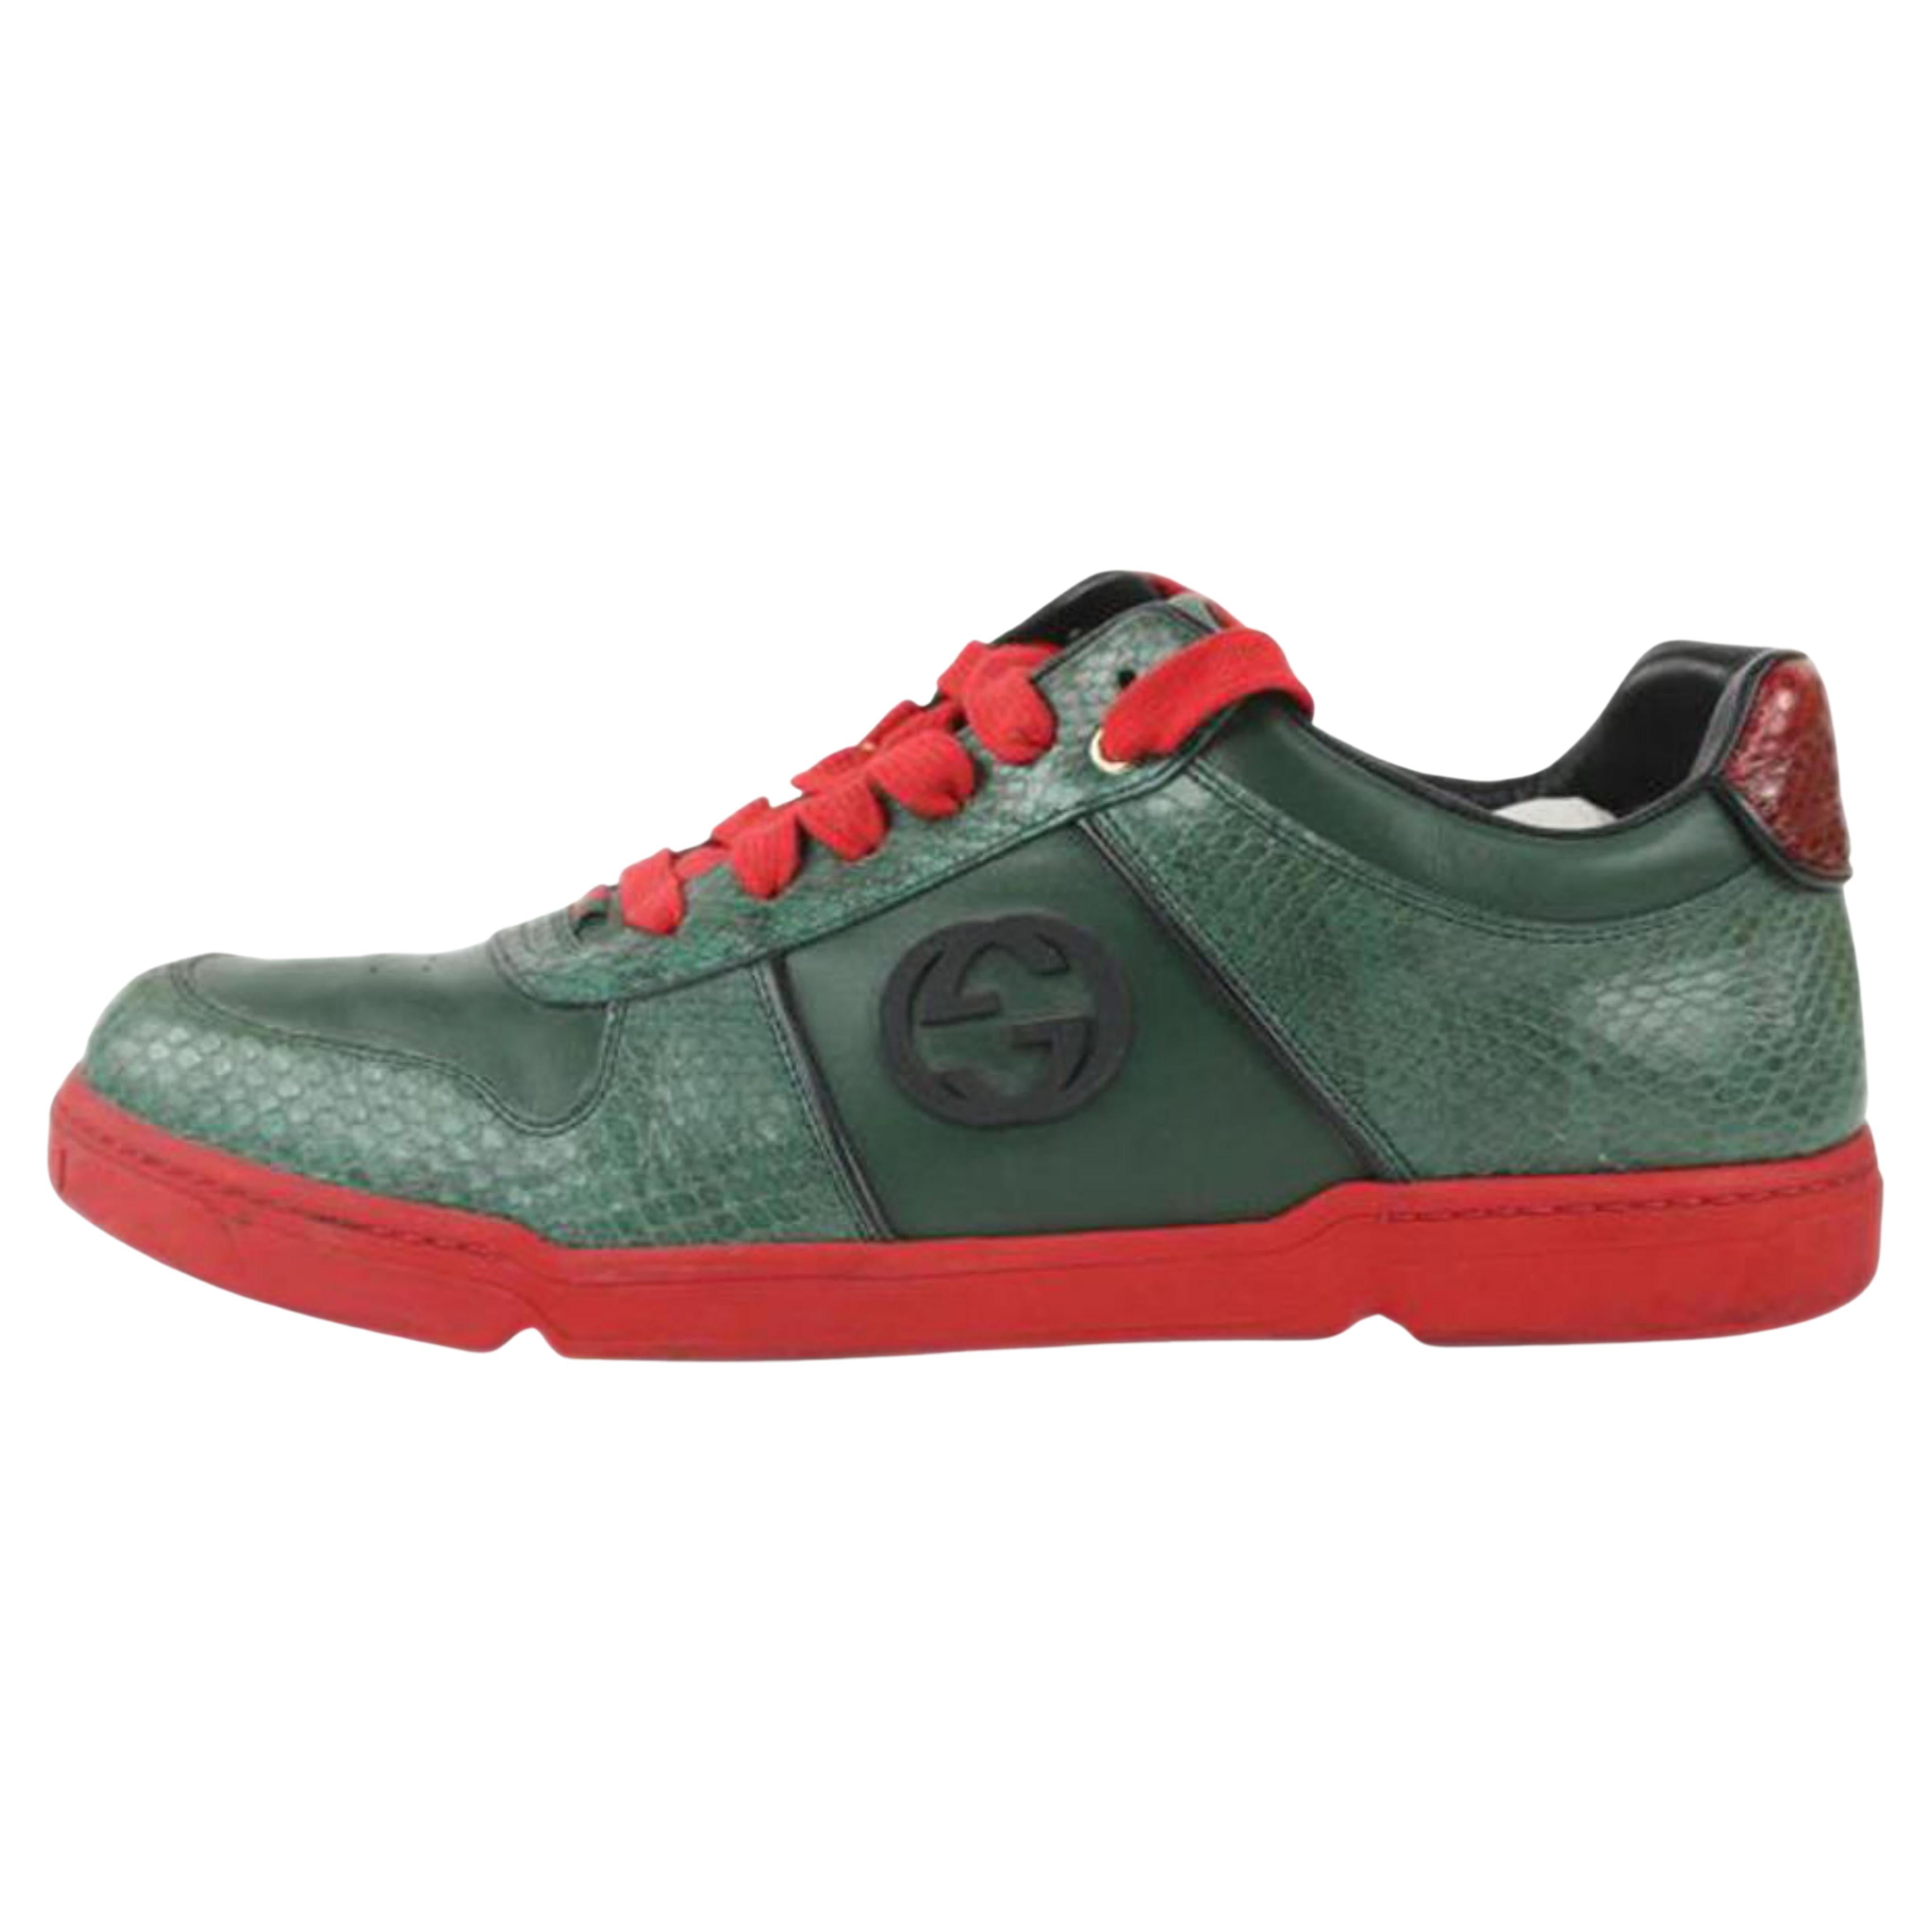 Gucci Men's 12.5 US Red x Green Python Low Top Classic Sneaker 1gg1112